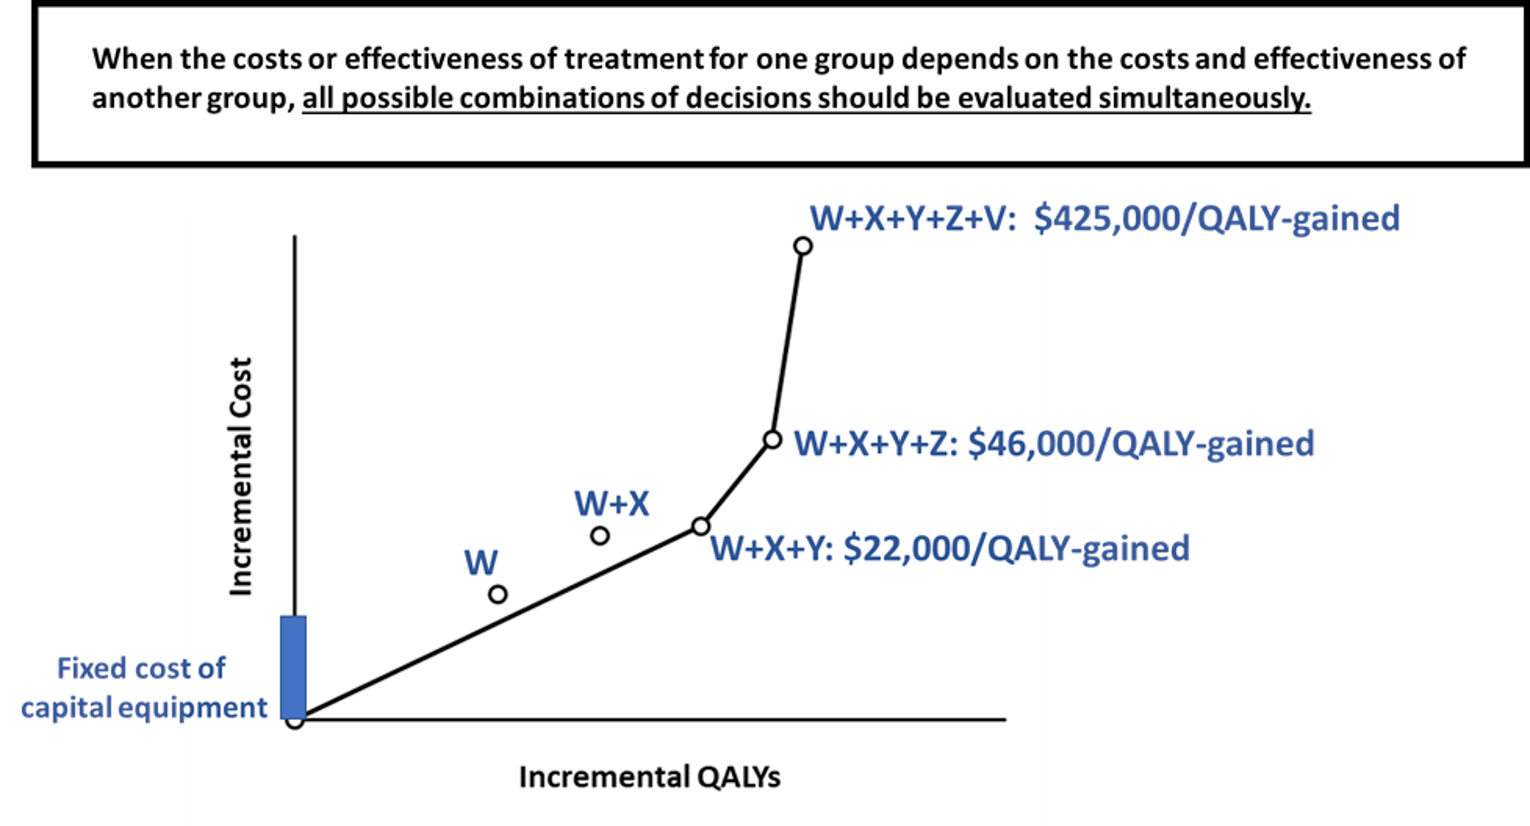 Line graph examines what happens when the costs or effectiveness of treatment for one group depends on the costs and effectiveness of another group. It highlights that all possible combinations of decisions should be evaluated simultaneously.